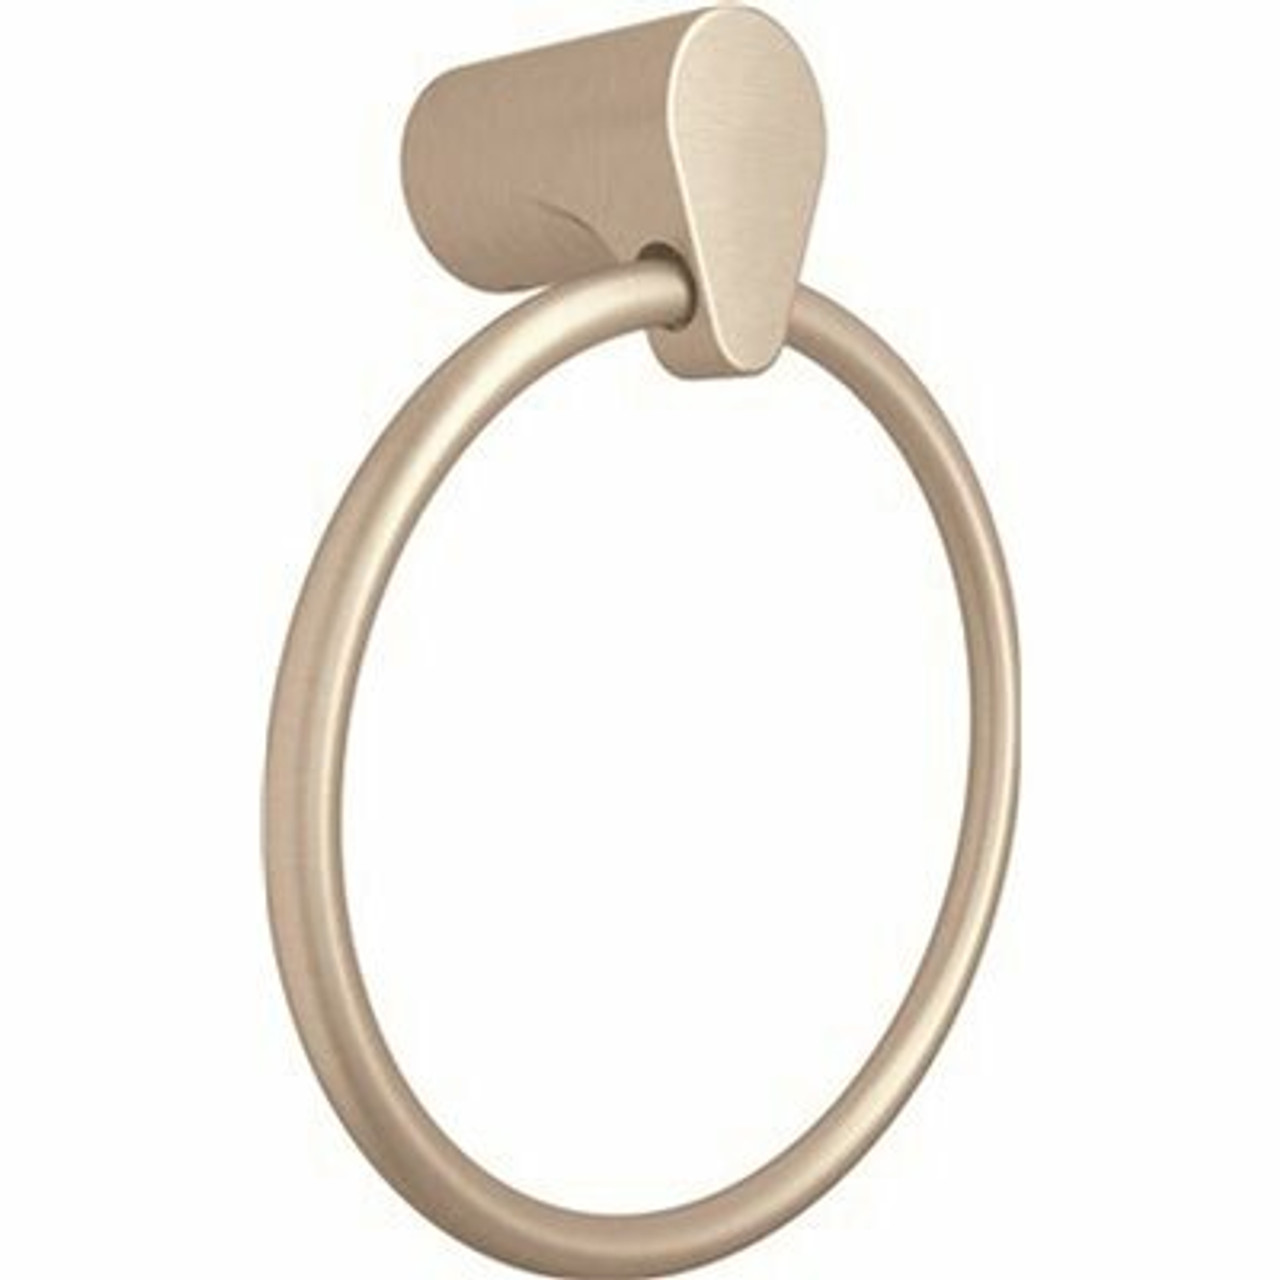 Cleveland Faucet Group Towel Ring Edge-Stone Brushed Nickel